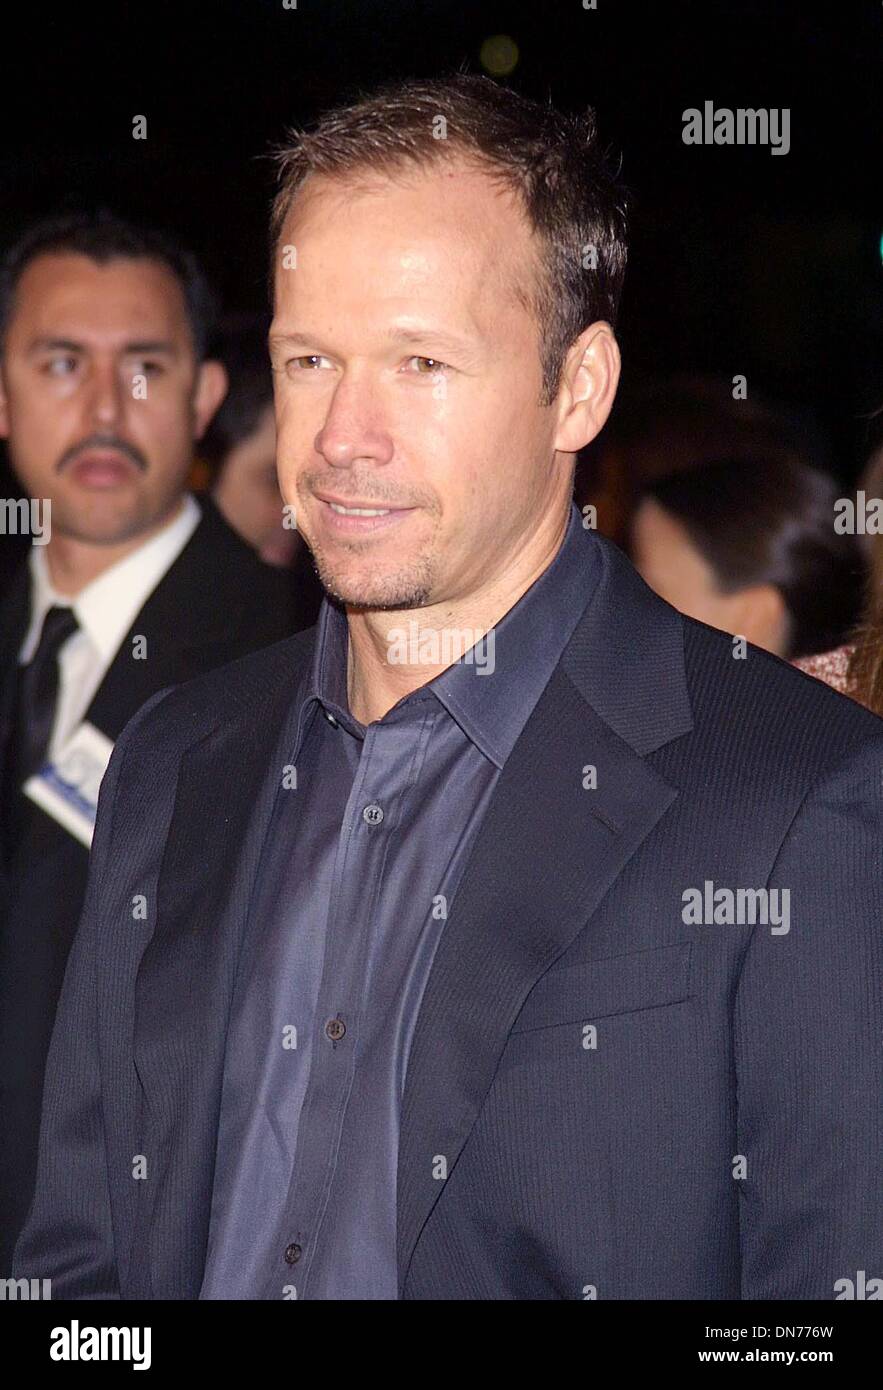 Oct. 16, 2002 - Beverly Hills, CALIFORNIA, USA - DONNIE WAHLBERG ...